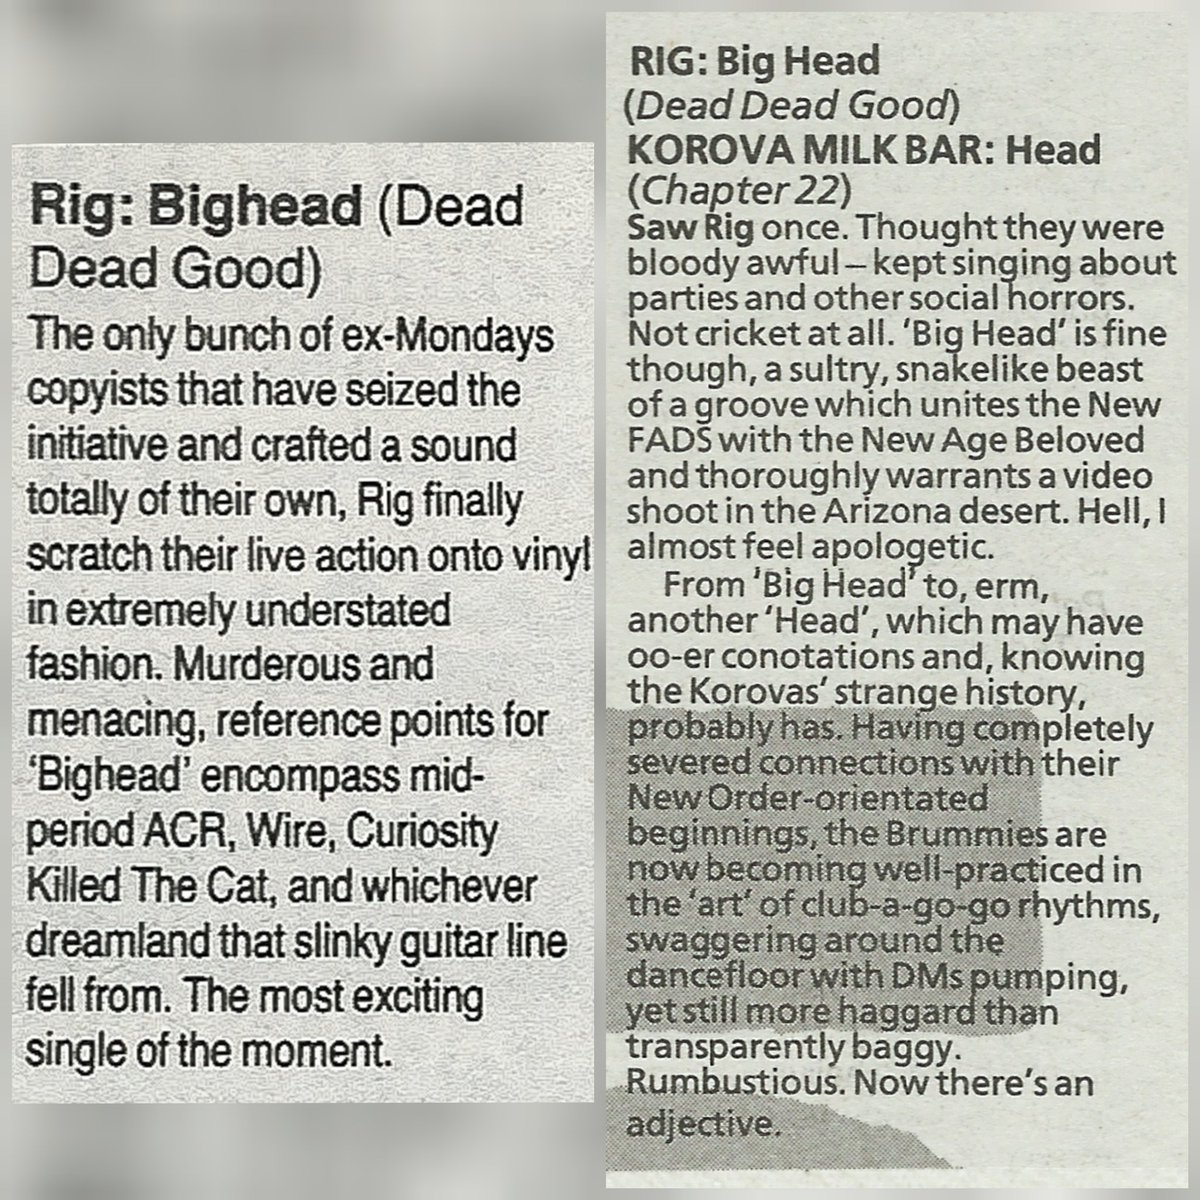 Thirty three years ago today our new record 'Big Head' was the most exciting single of the moment. Now remastered and available on all major streaming platforms deaddeadgood.lnk.to/Rig-BigHead #OTD #Manchester #ManchesterMusic #Rig